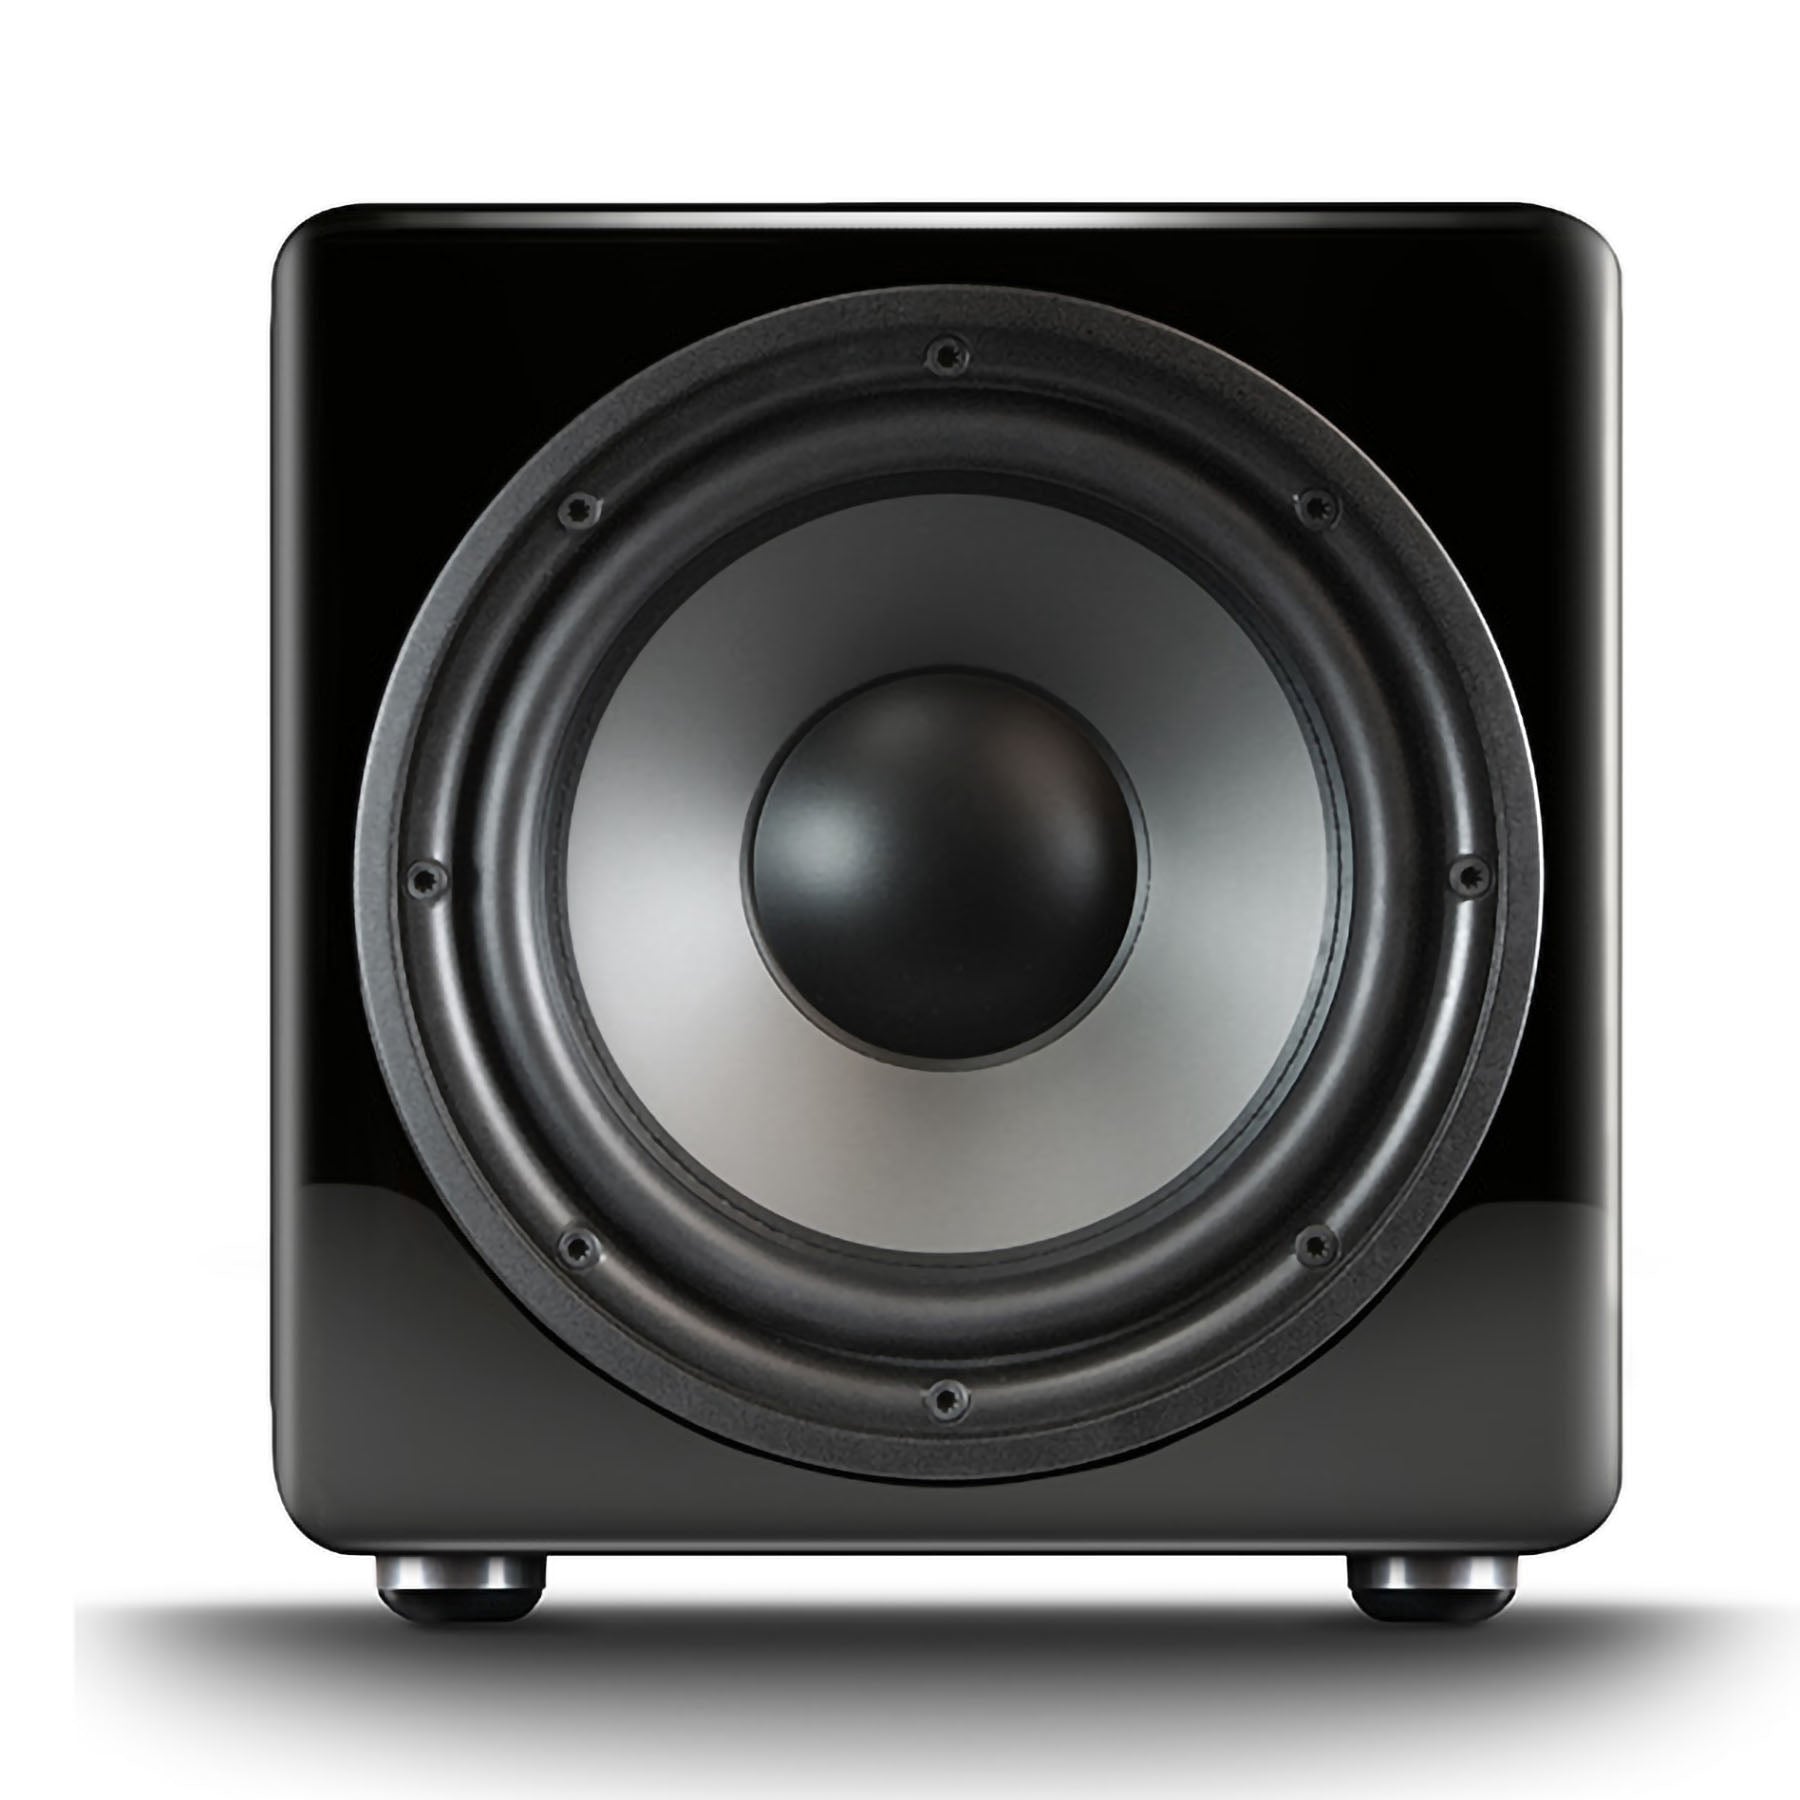 PSB SubSeries 350 – 12 Inch Subwoofer